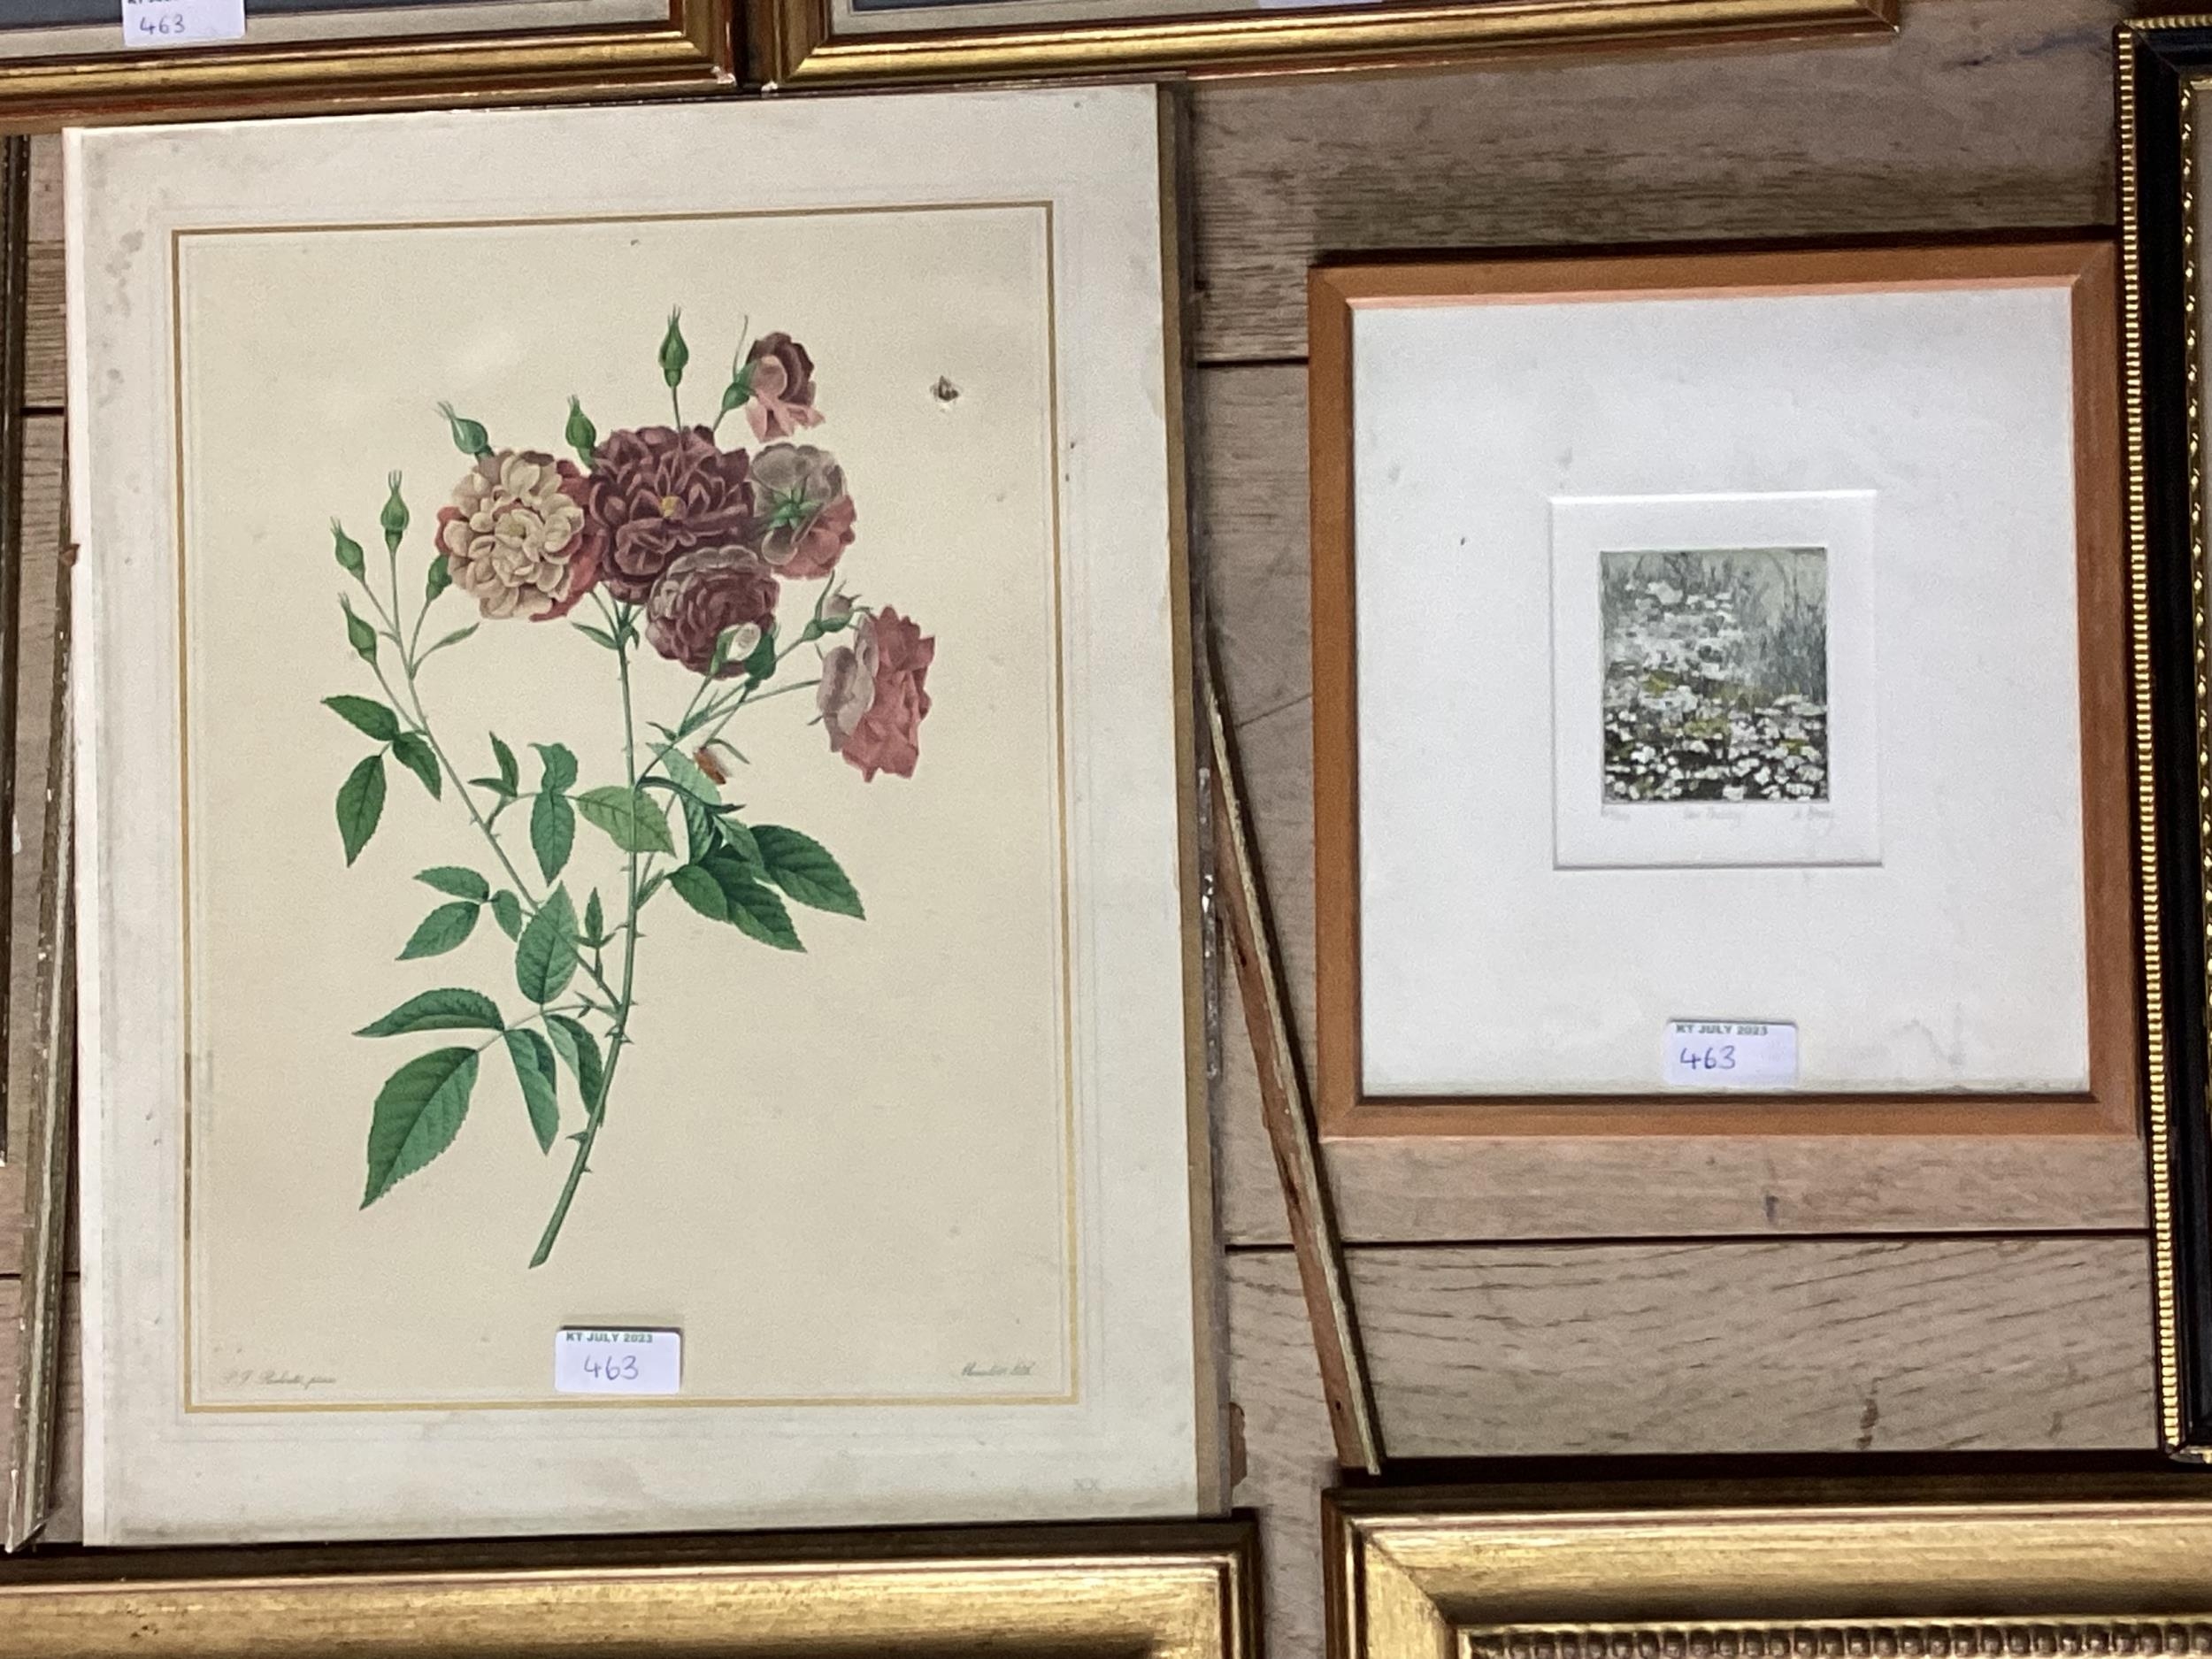 Pair of decorative gilt glazed botanical prints, pair of framed ang glazed fencing prints and a - Image 4 of 7